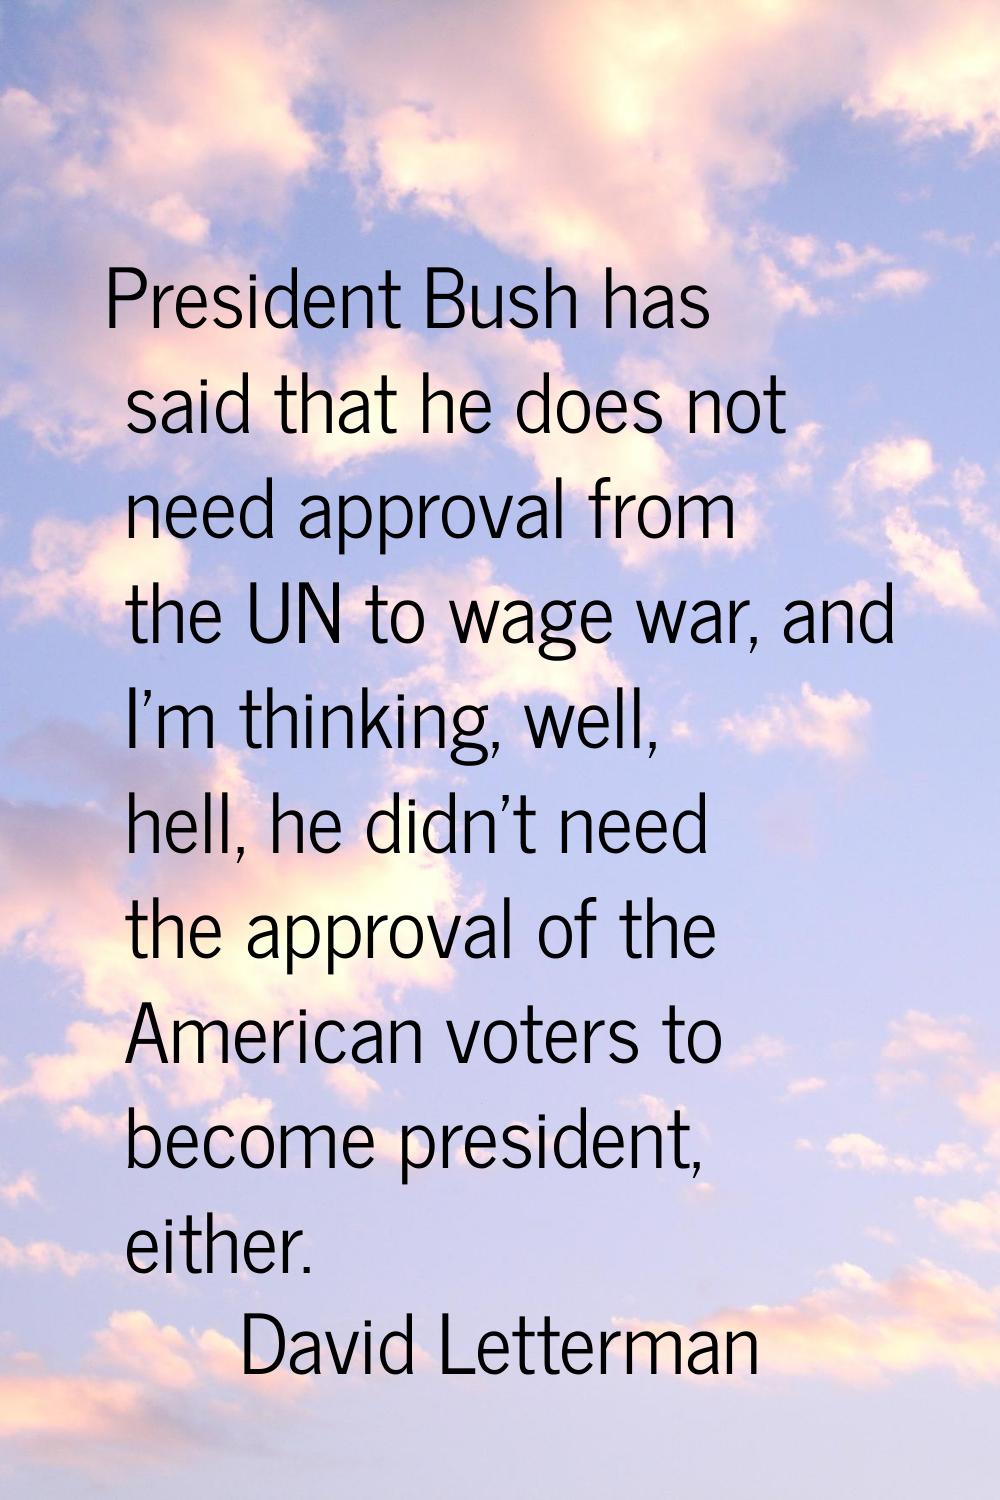 President Bush has said that he does not need approval from the UN to wage war, and I'm thinking, w